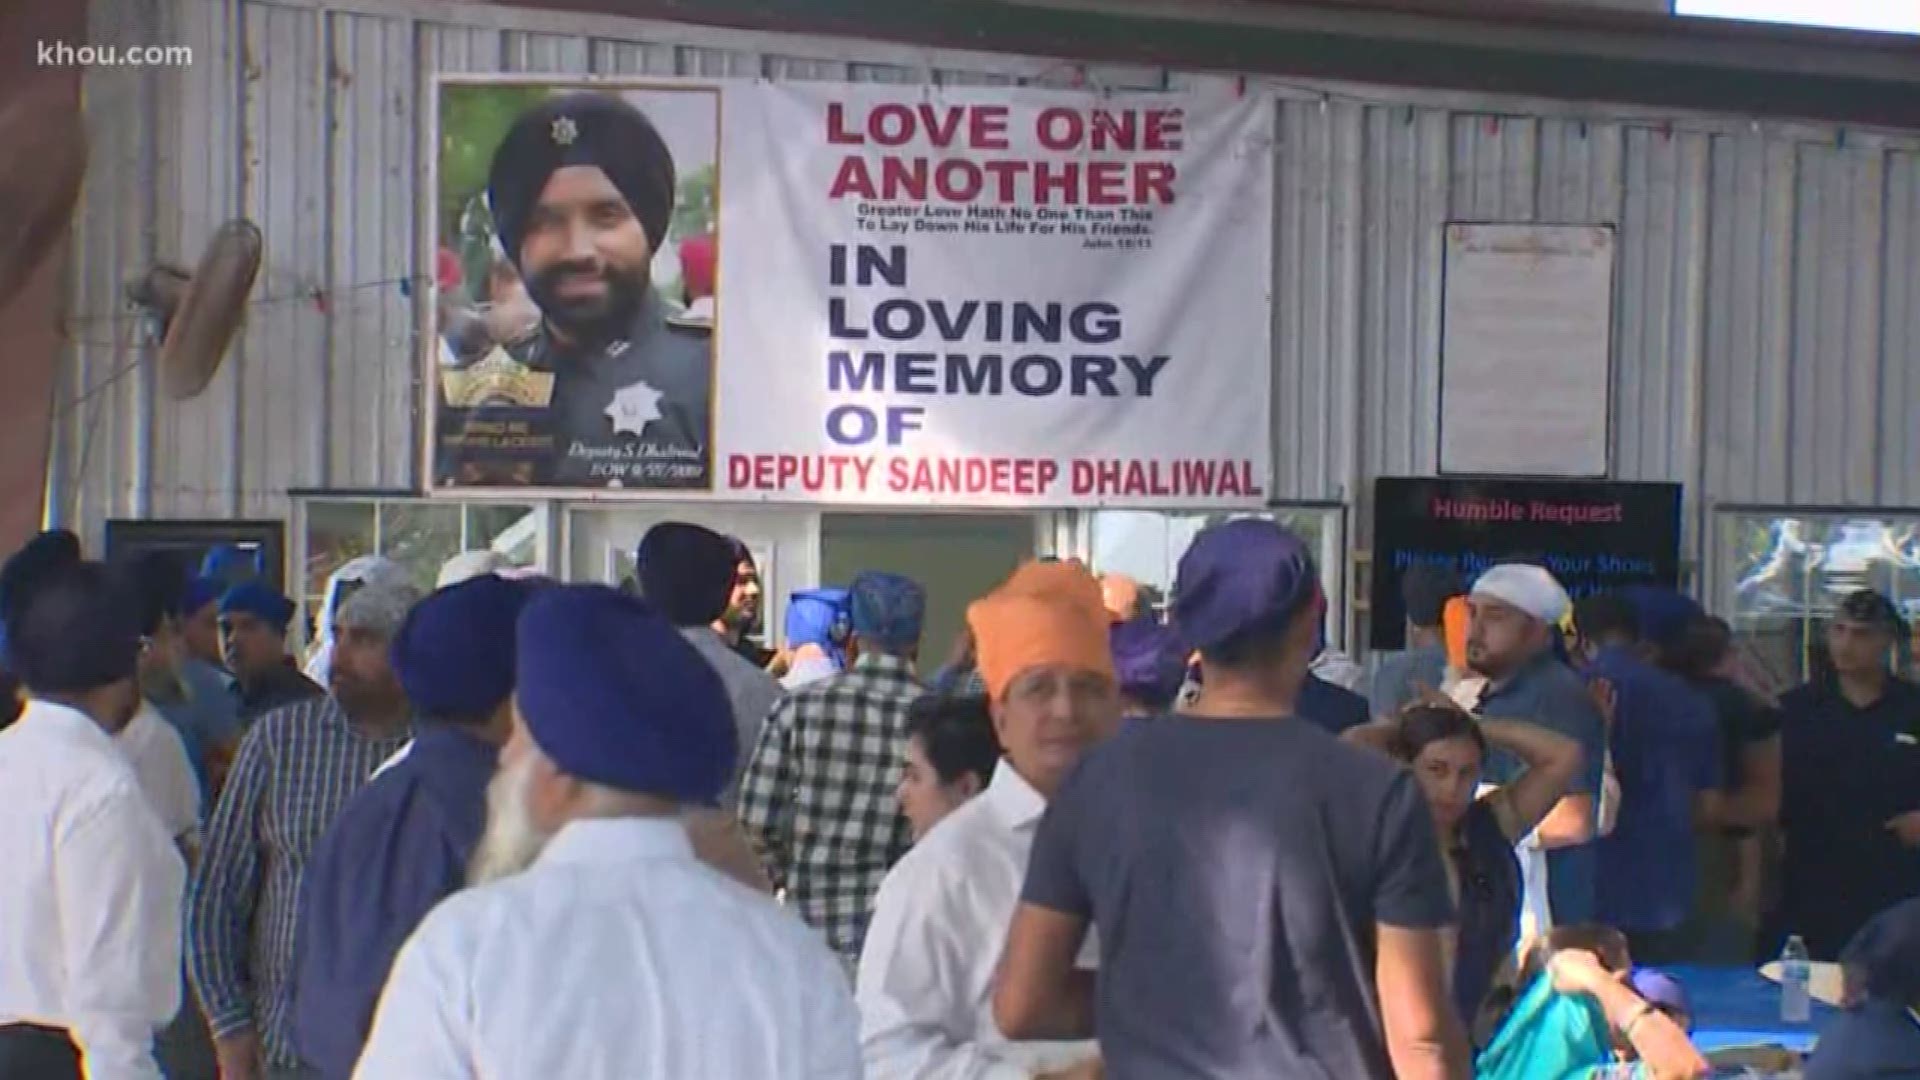 The gathering was to honor fallen Harris County deputy Sandeep Dhaliwal, a Sikh custom after a loved one dies.